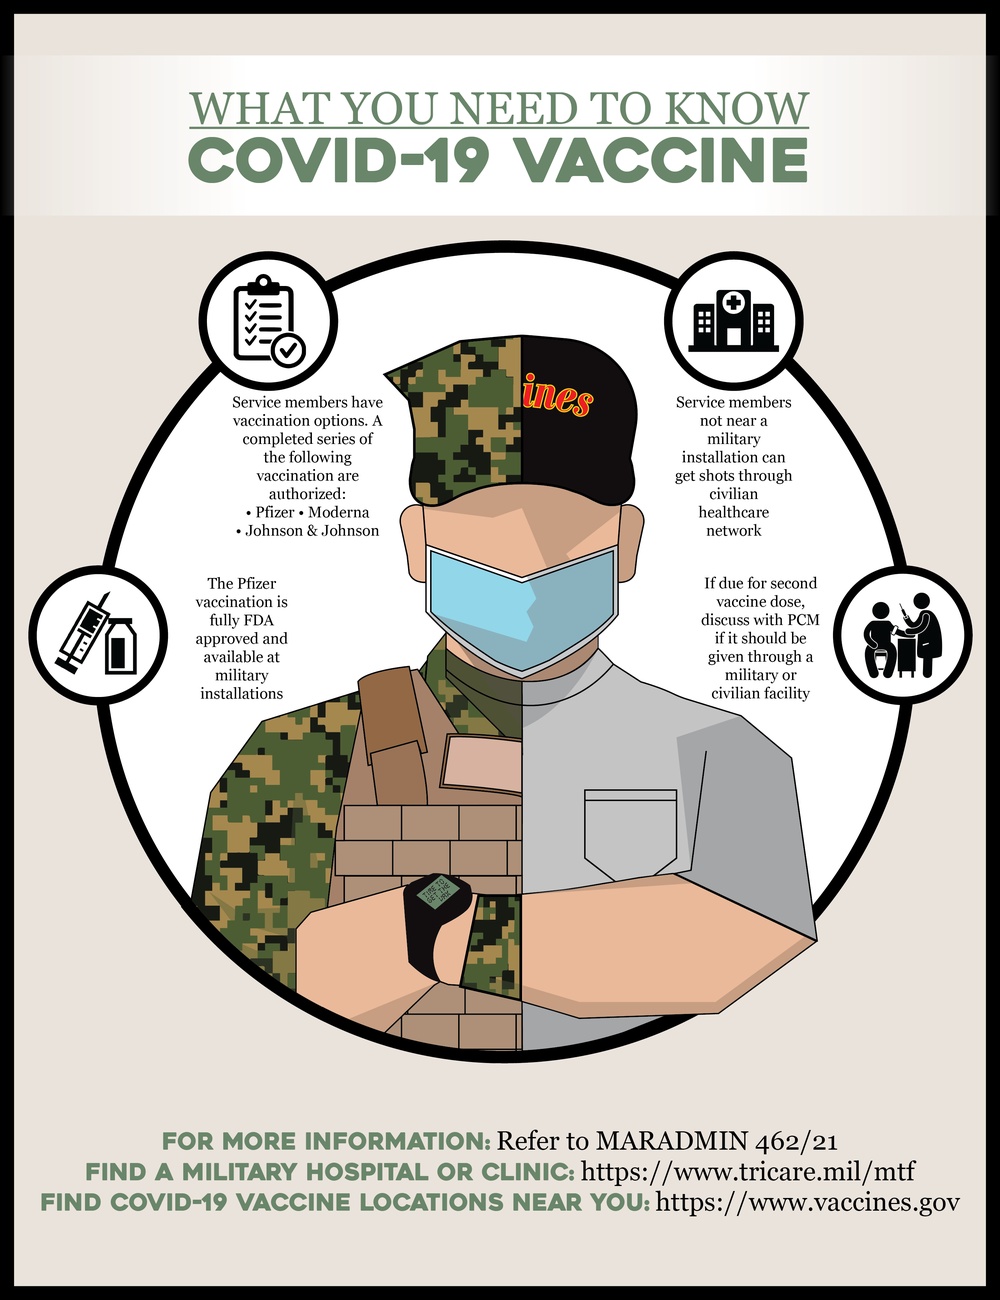 COVID-19 Vaccination: What You Need to Know (Facebook)